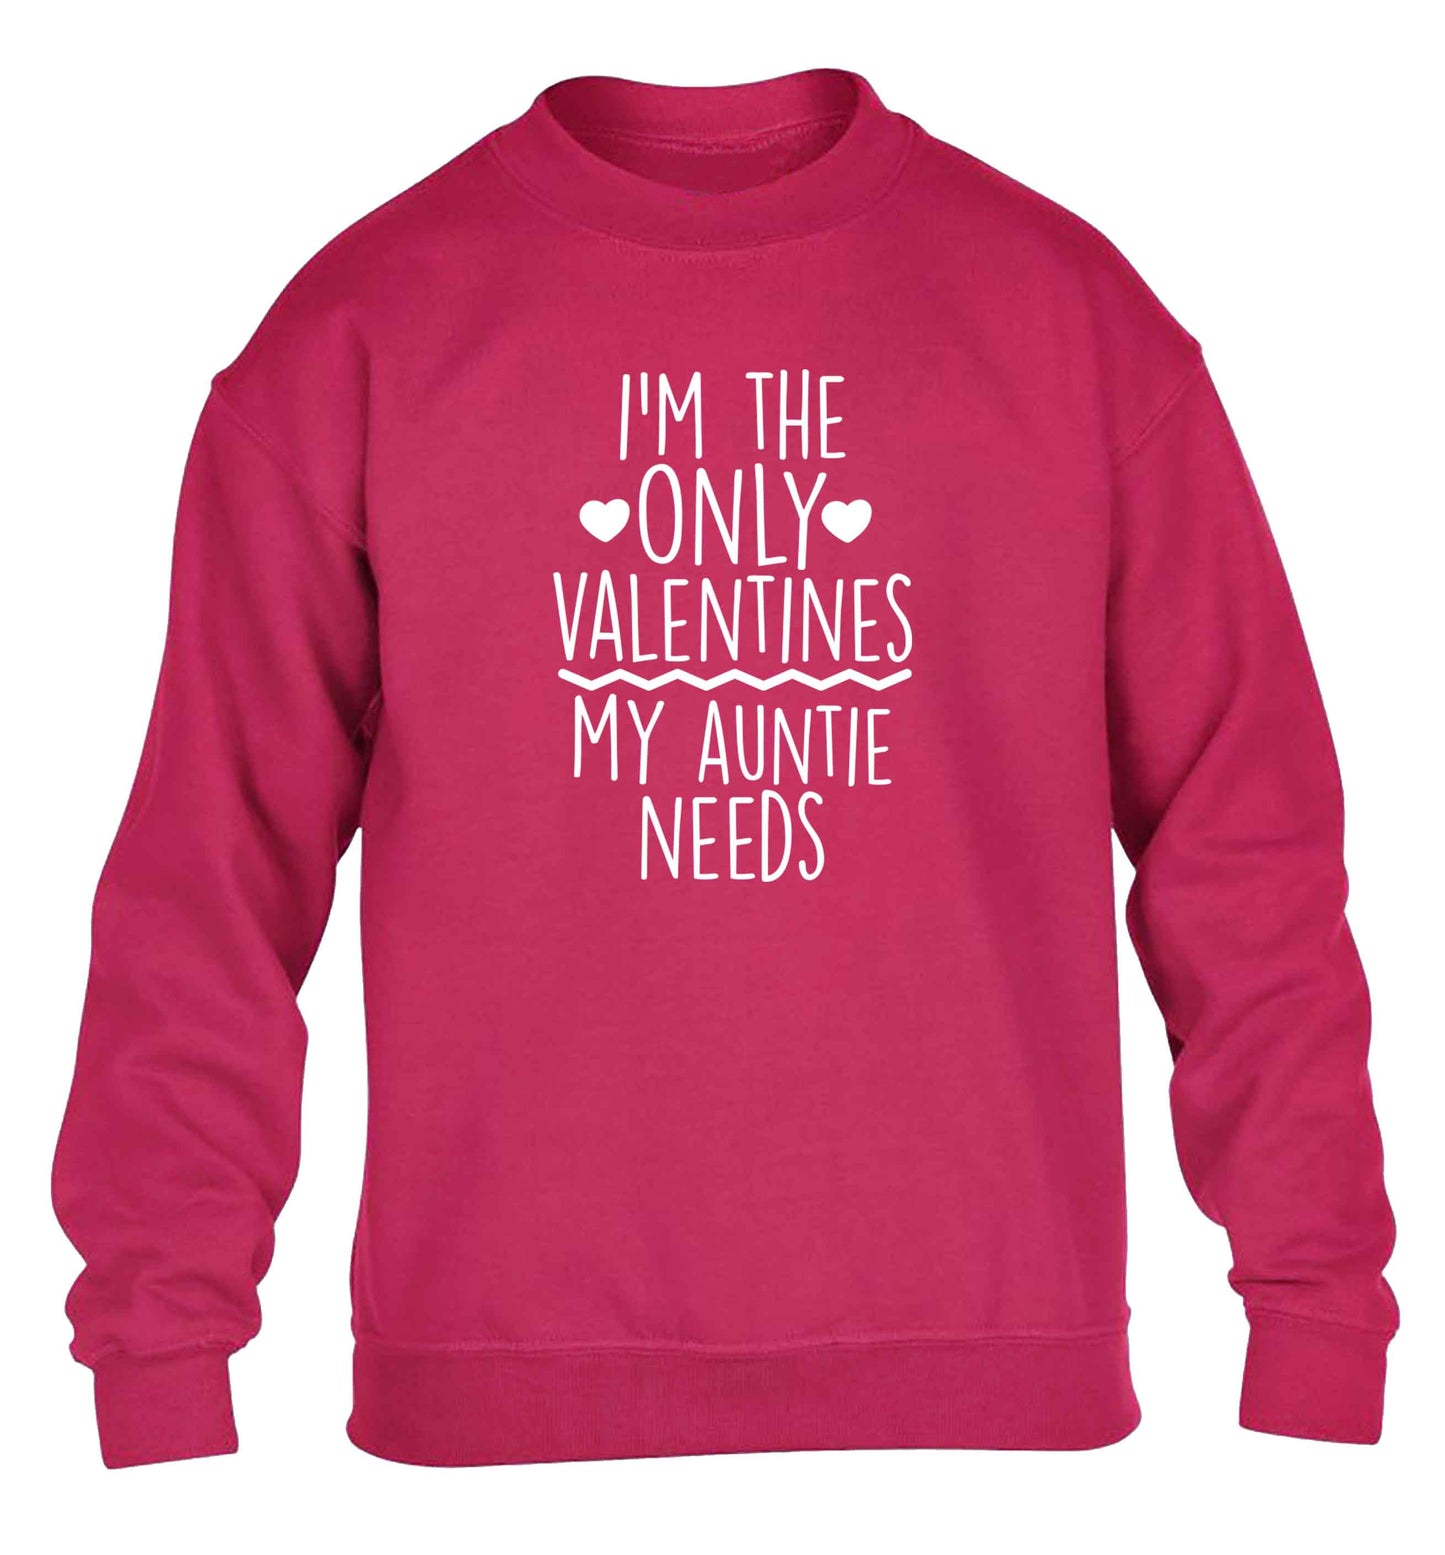 I'm the only valentines my auntie needs children's pink sweater 12-13 Years